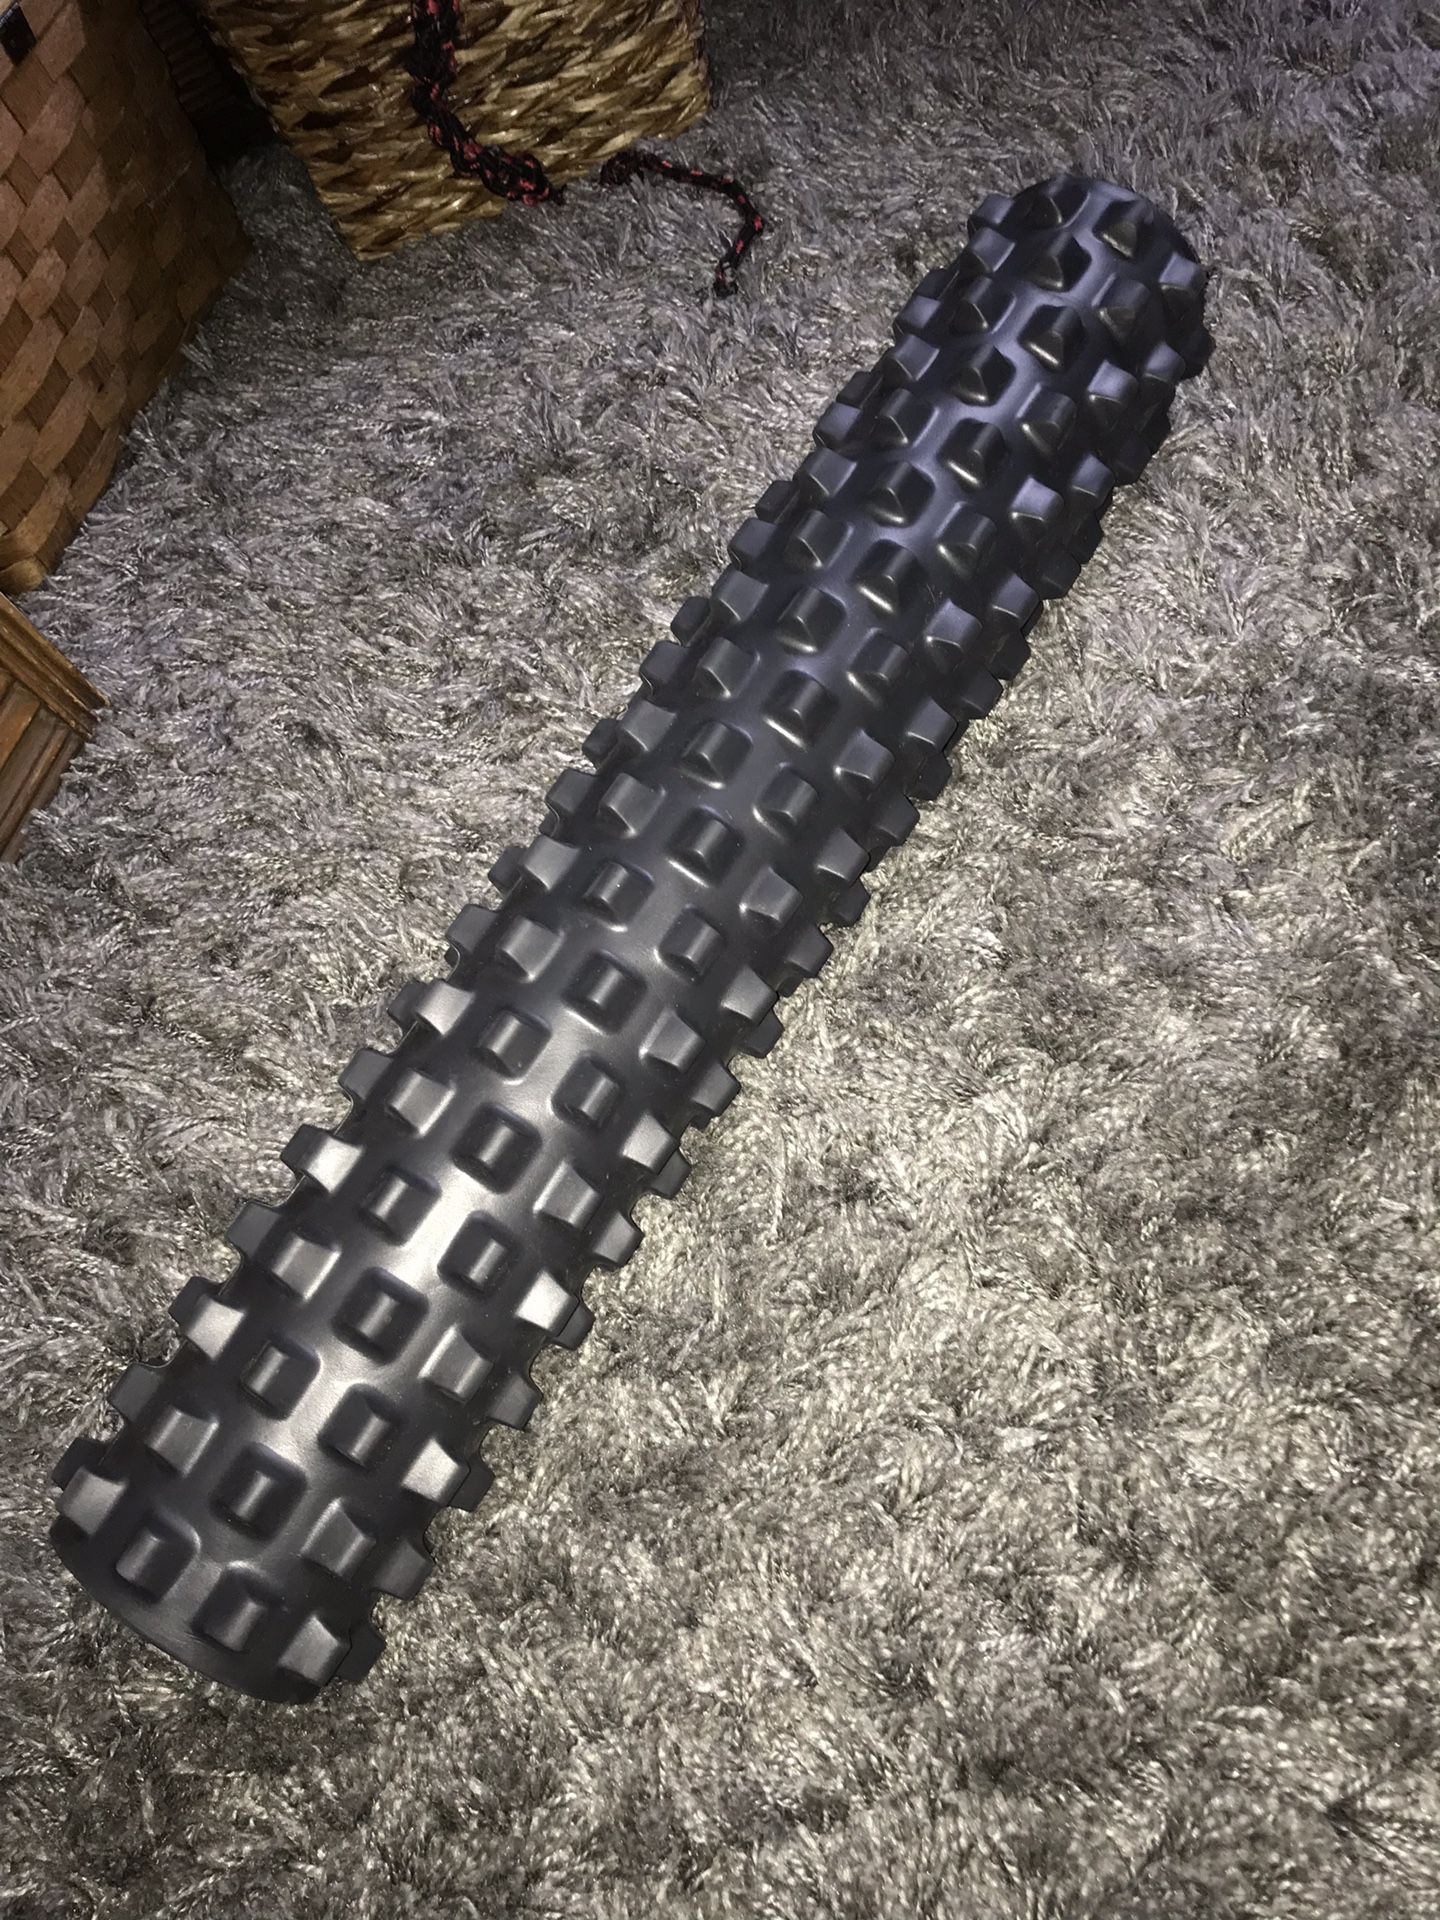 Exercise & Yoga Rumble Roller